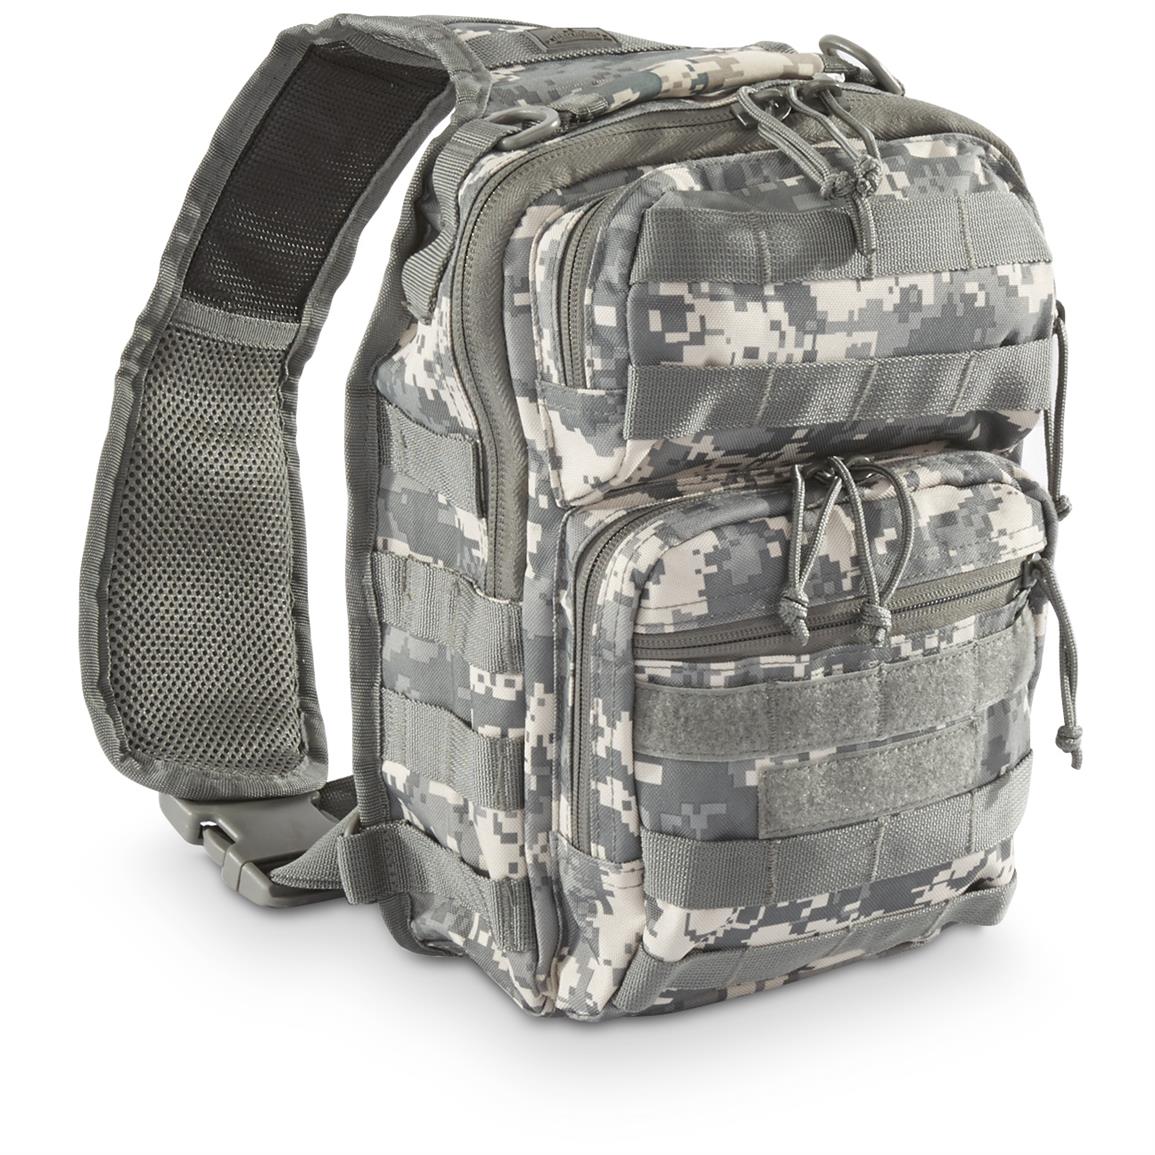 Red Rock Outdoor Gear Rover Sling Bag - 182449, Military Style ...